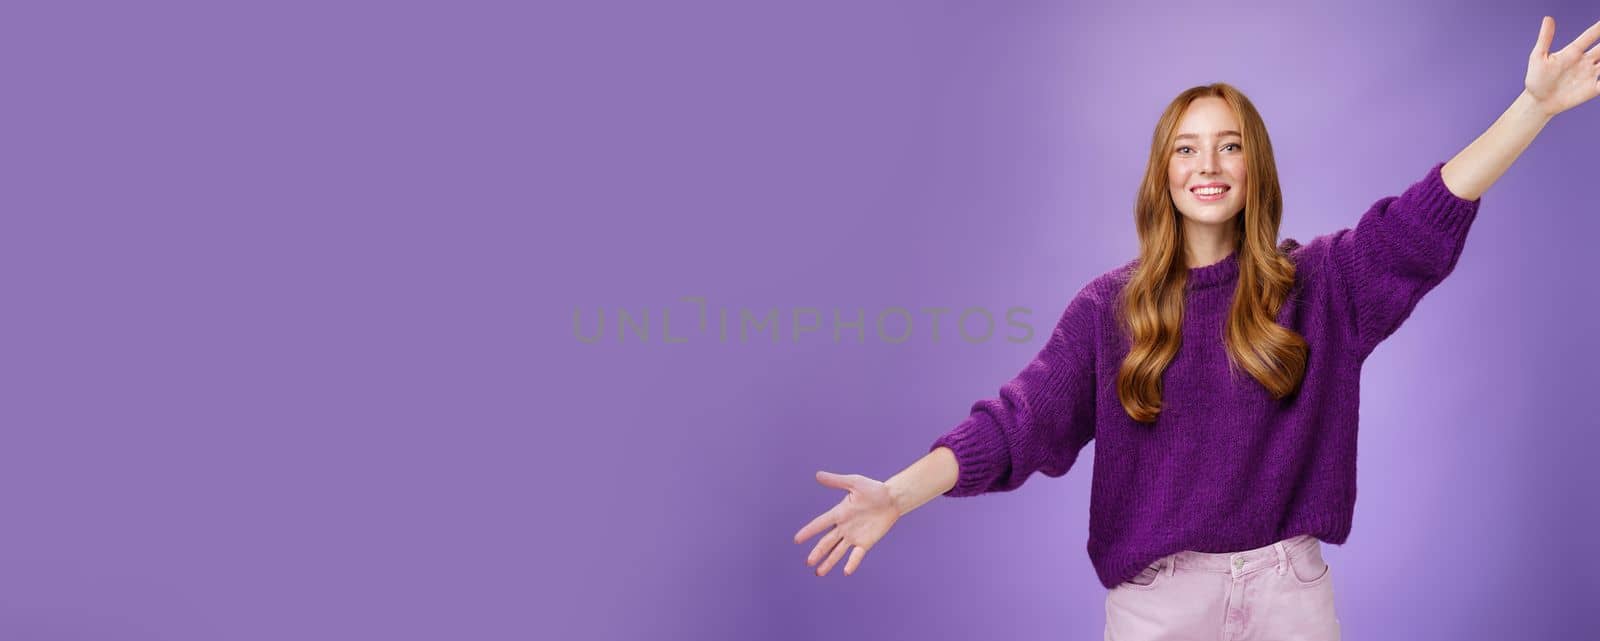 Girl stretched hands sideways to welcome and greet friend giving warm hug smiling broadly at camera standing joyful wanting cuddle over purple background, wearing violet sweater and pants. Copy space